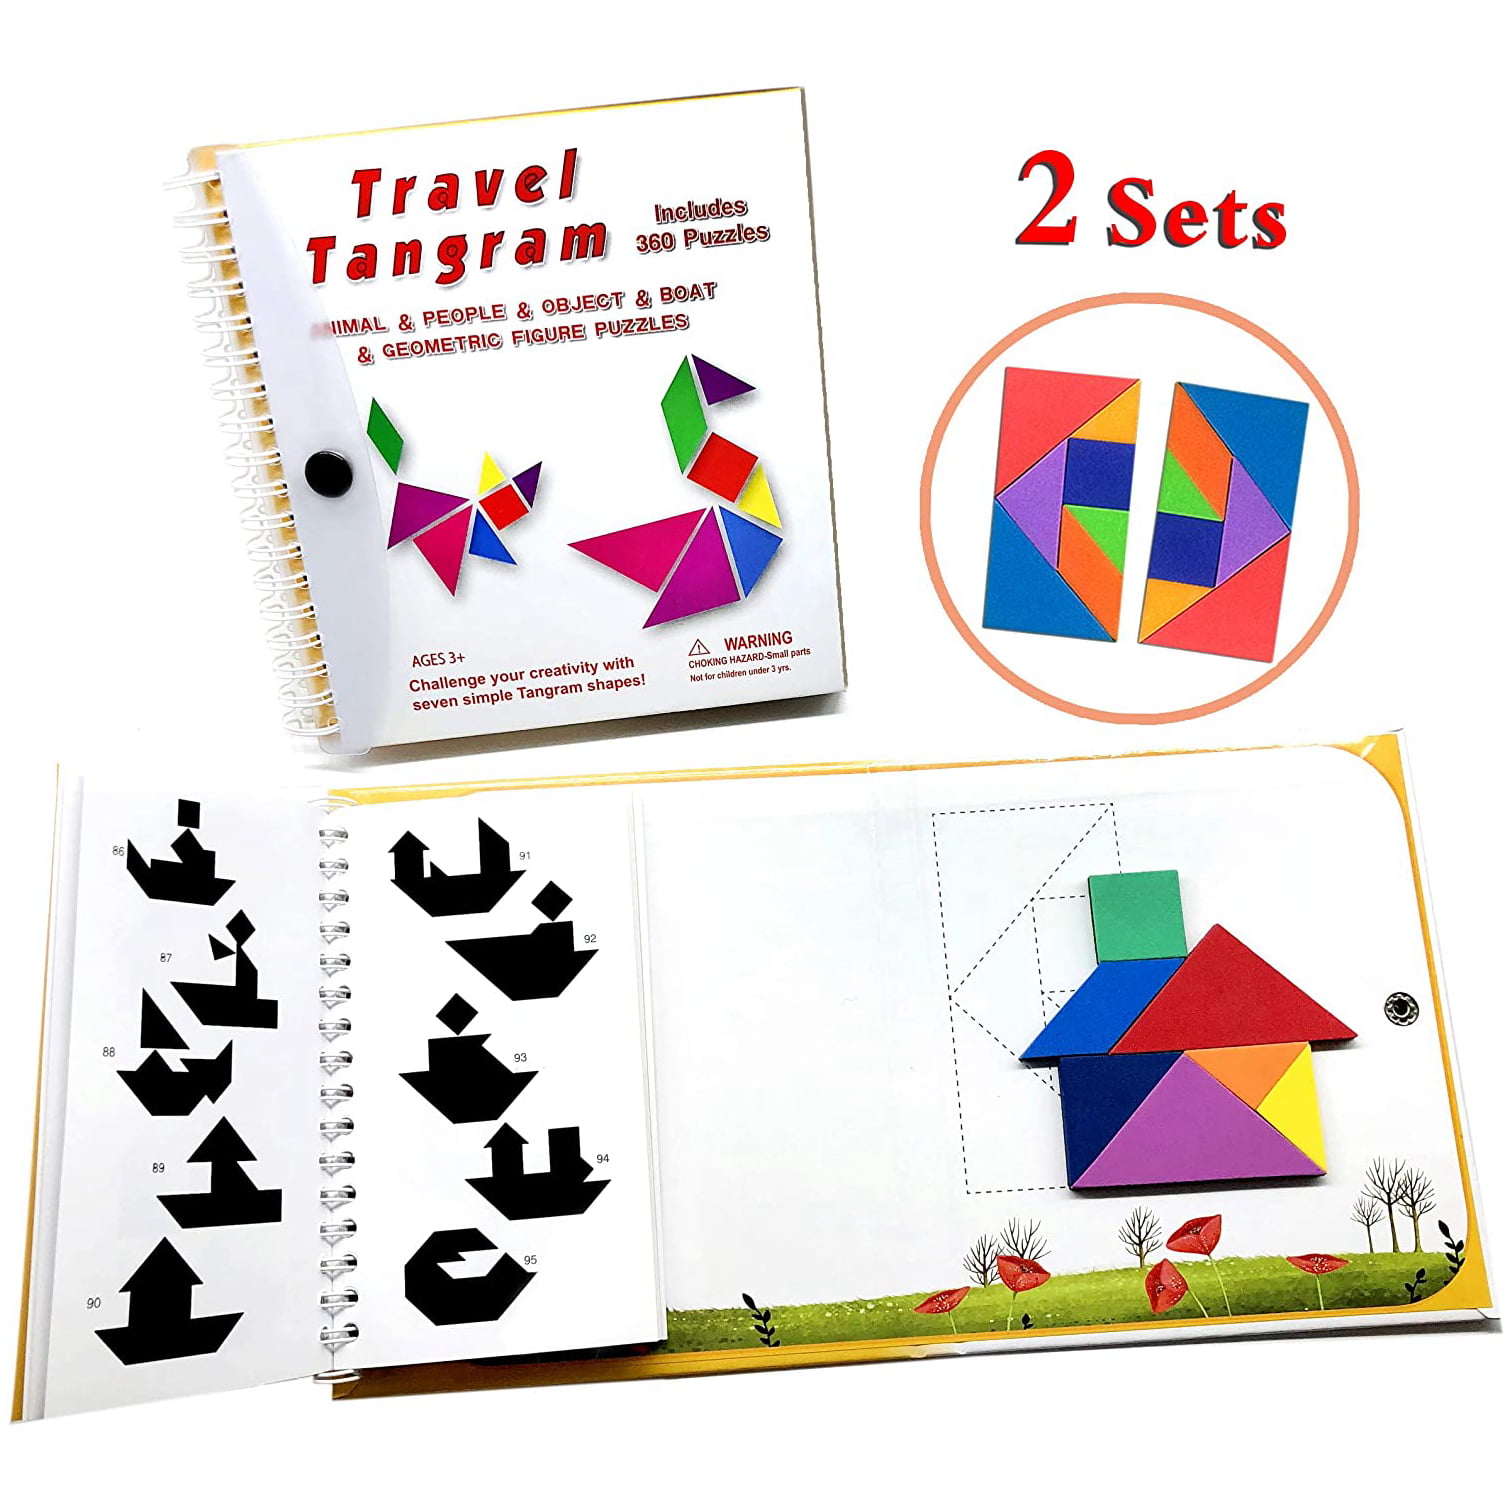 Tangram Travel Game Magnetic Puzzle Book Game Tangrams Jigsaw Shapes Dissection with Solution Questions Traveler Challenge IQ Educational Toy for 3-100 Years Old with 2 Set of Tangrams 360 Patterns 